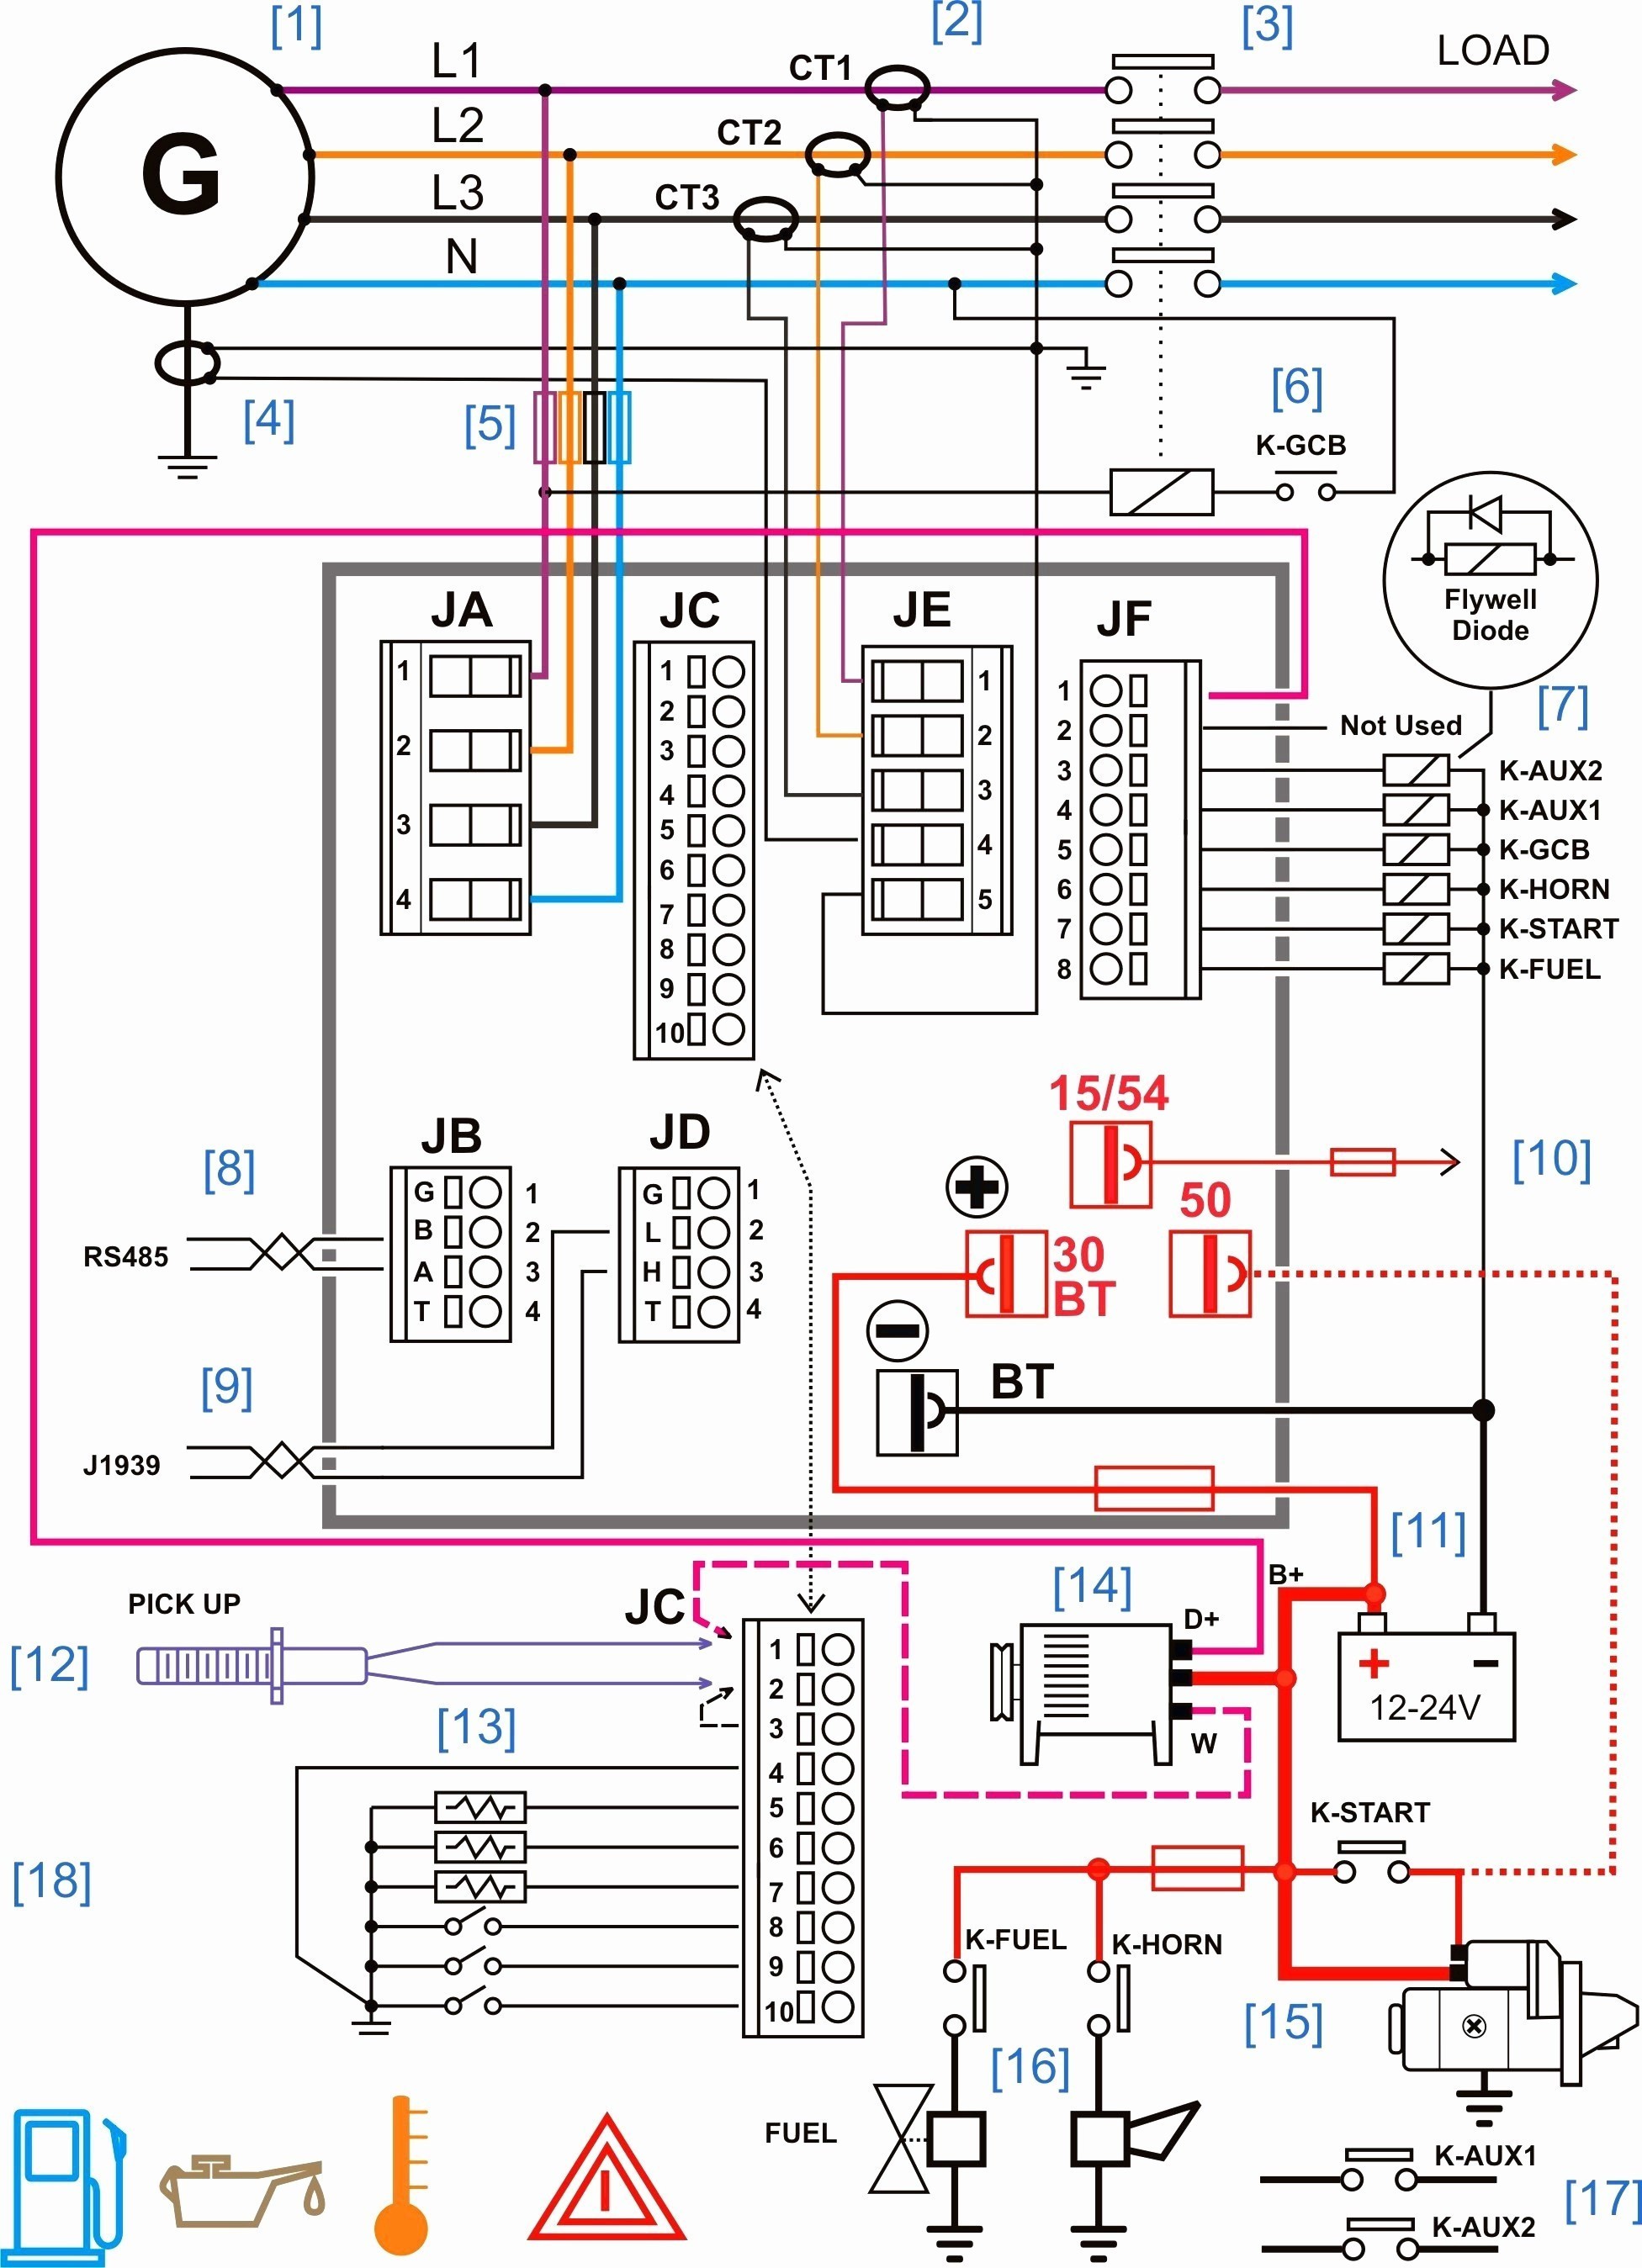 Electrical Wiring Diagrams Reference Diagram House Wiring Best Automotive Wiring Diagram